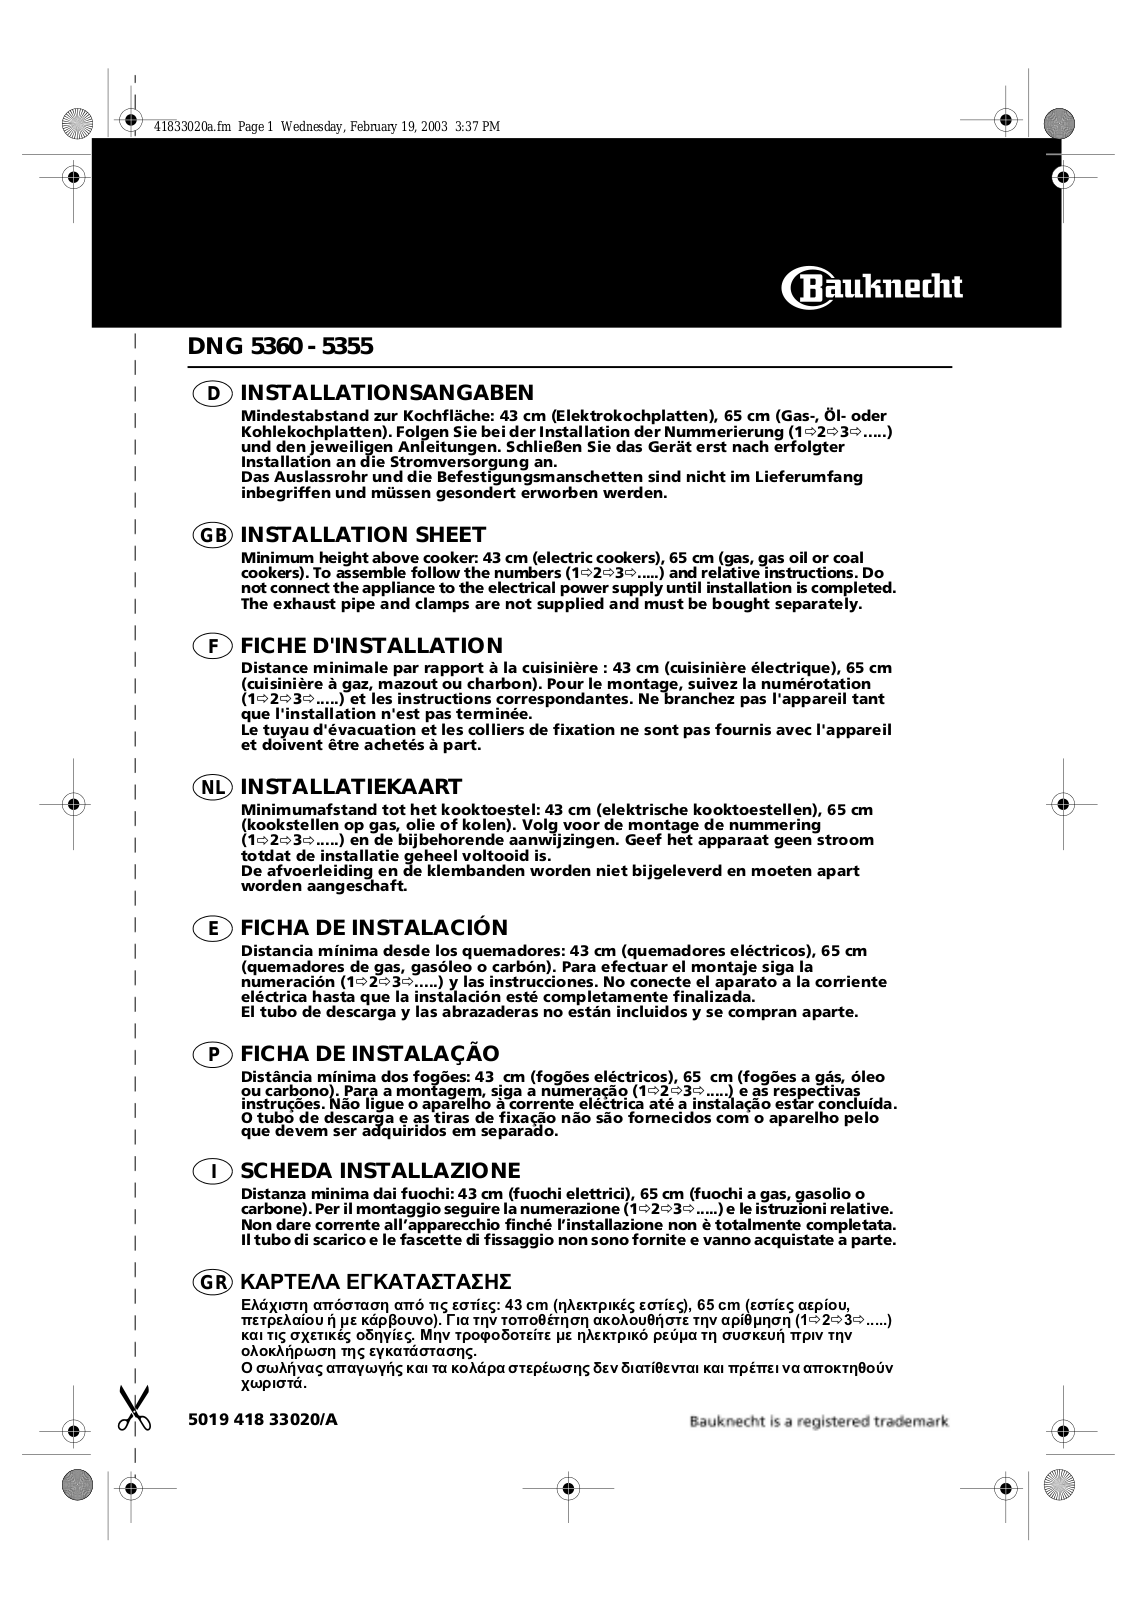 Whirlpool DNHV 5460 SG, DNG 5355 IN INSTRUCTION FOR USE